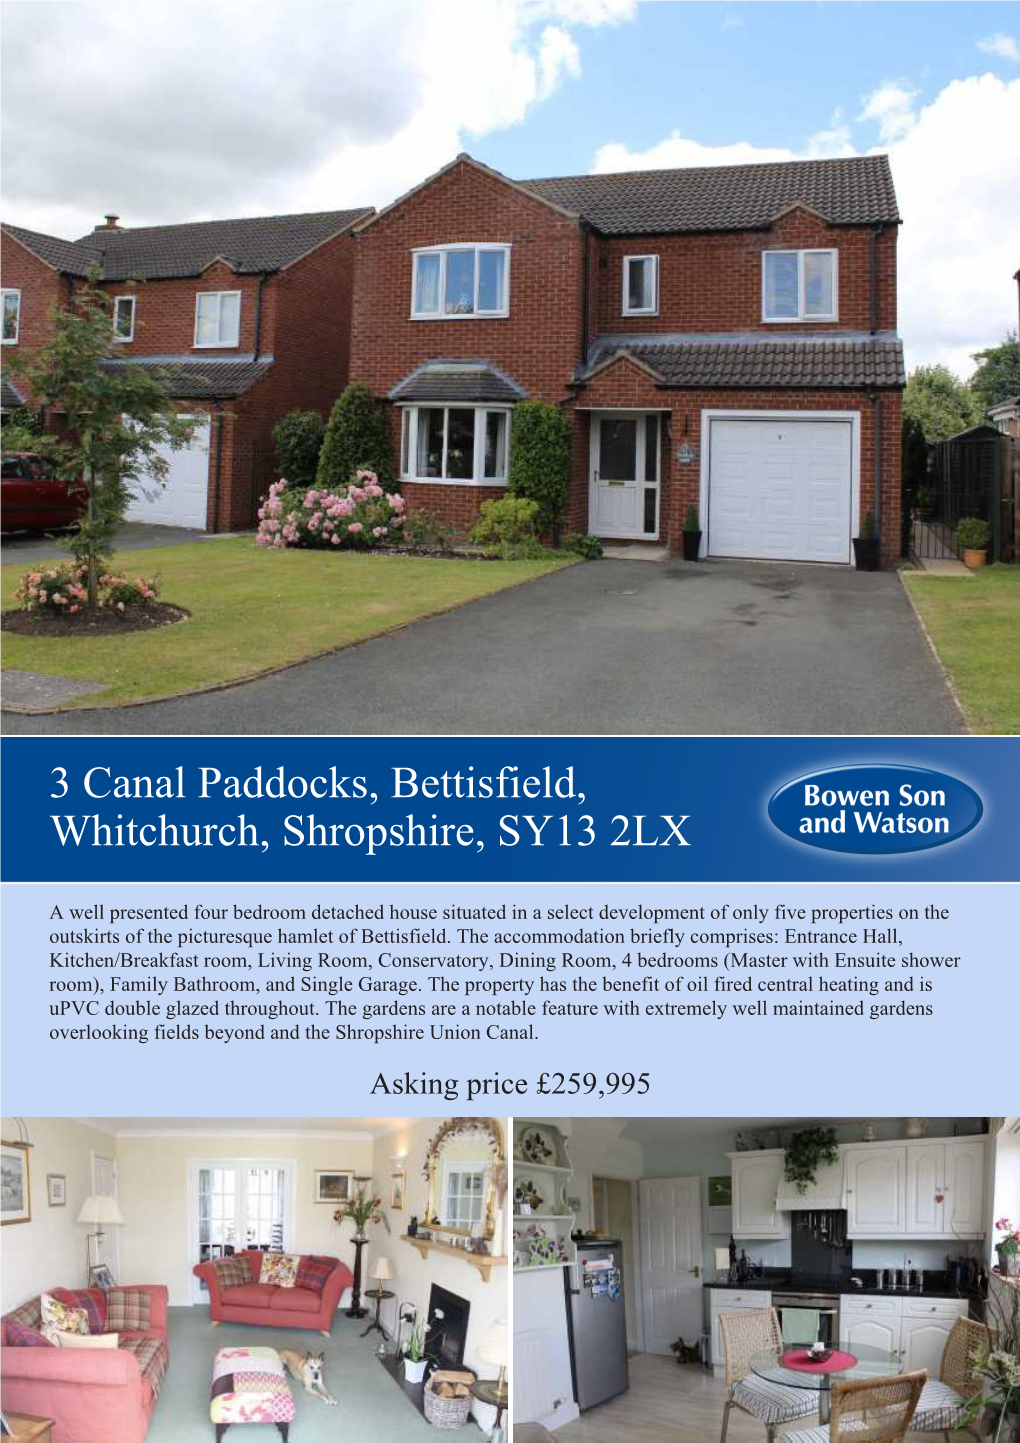 3 Canal Paddocks, Bettisfield, Whitchurch, Shropshire, SY13 2LX